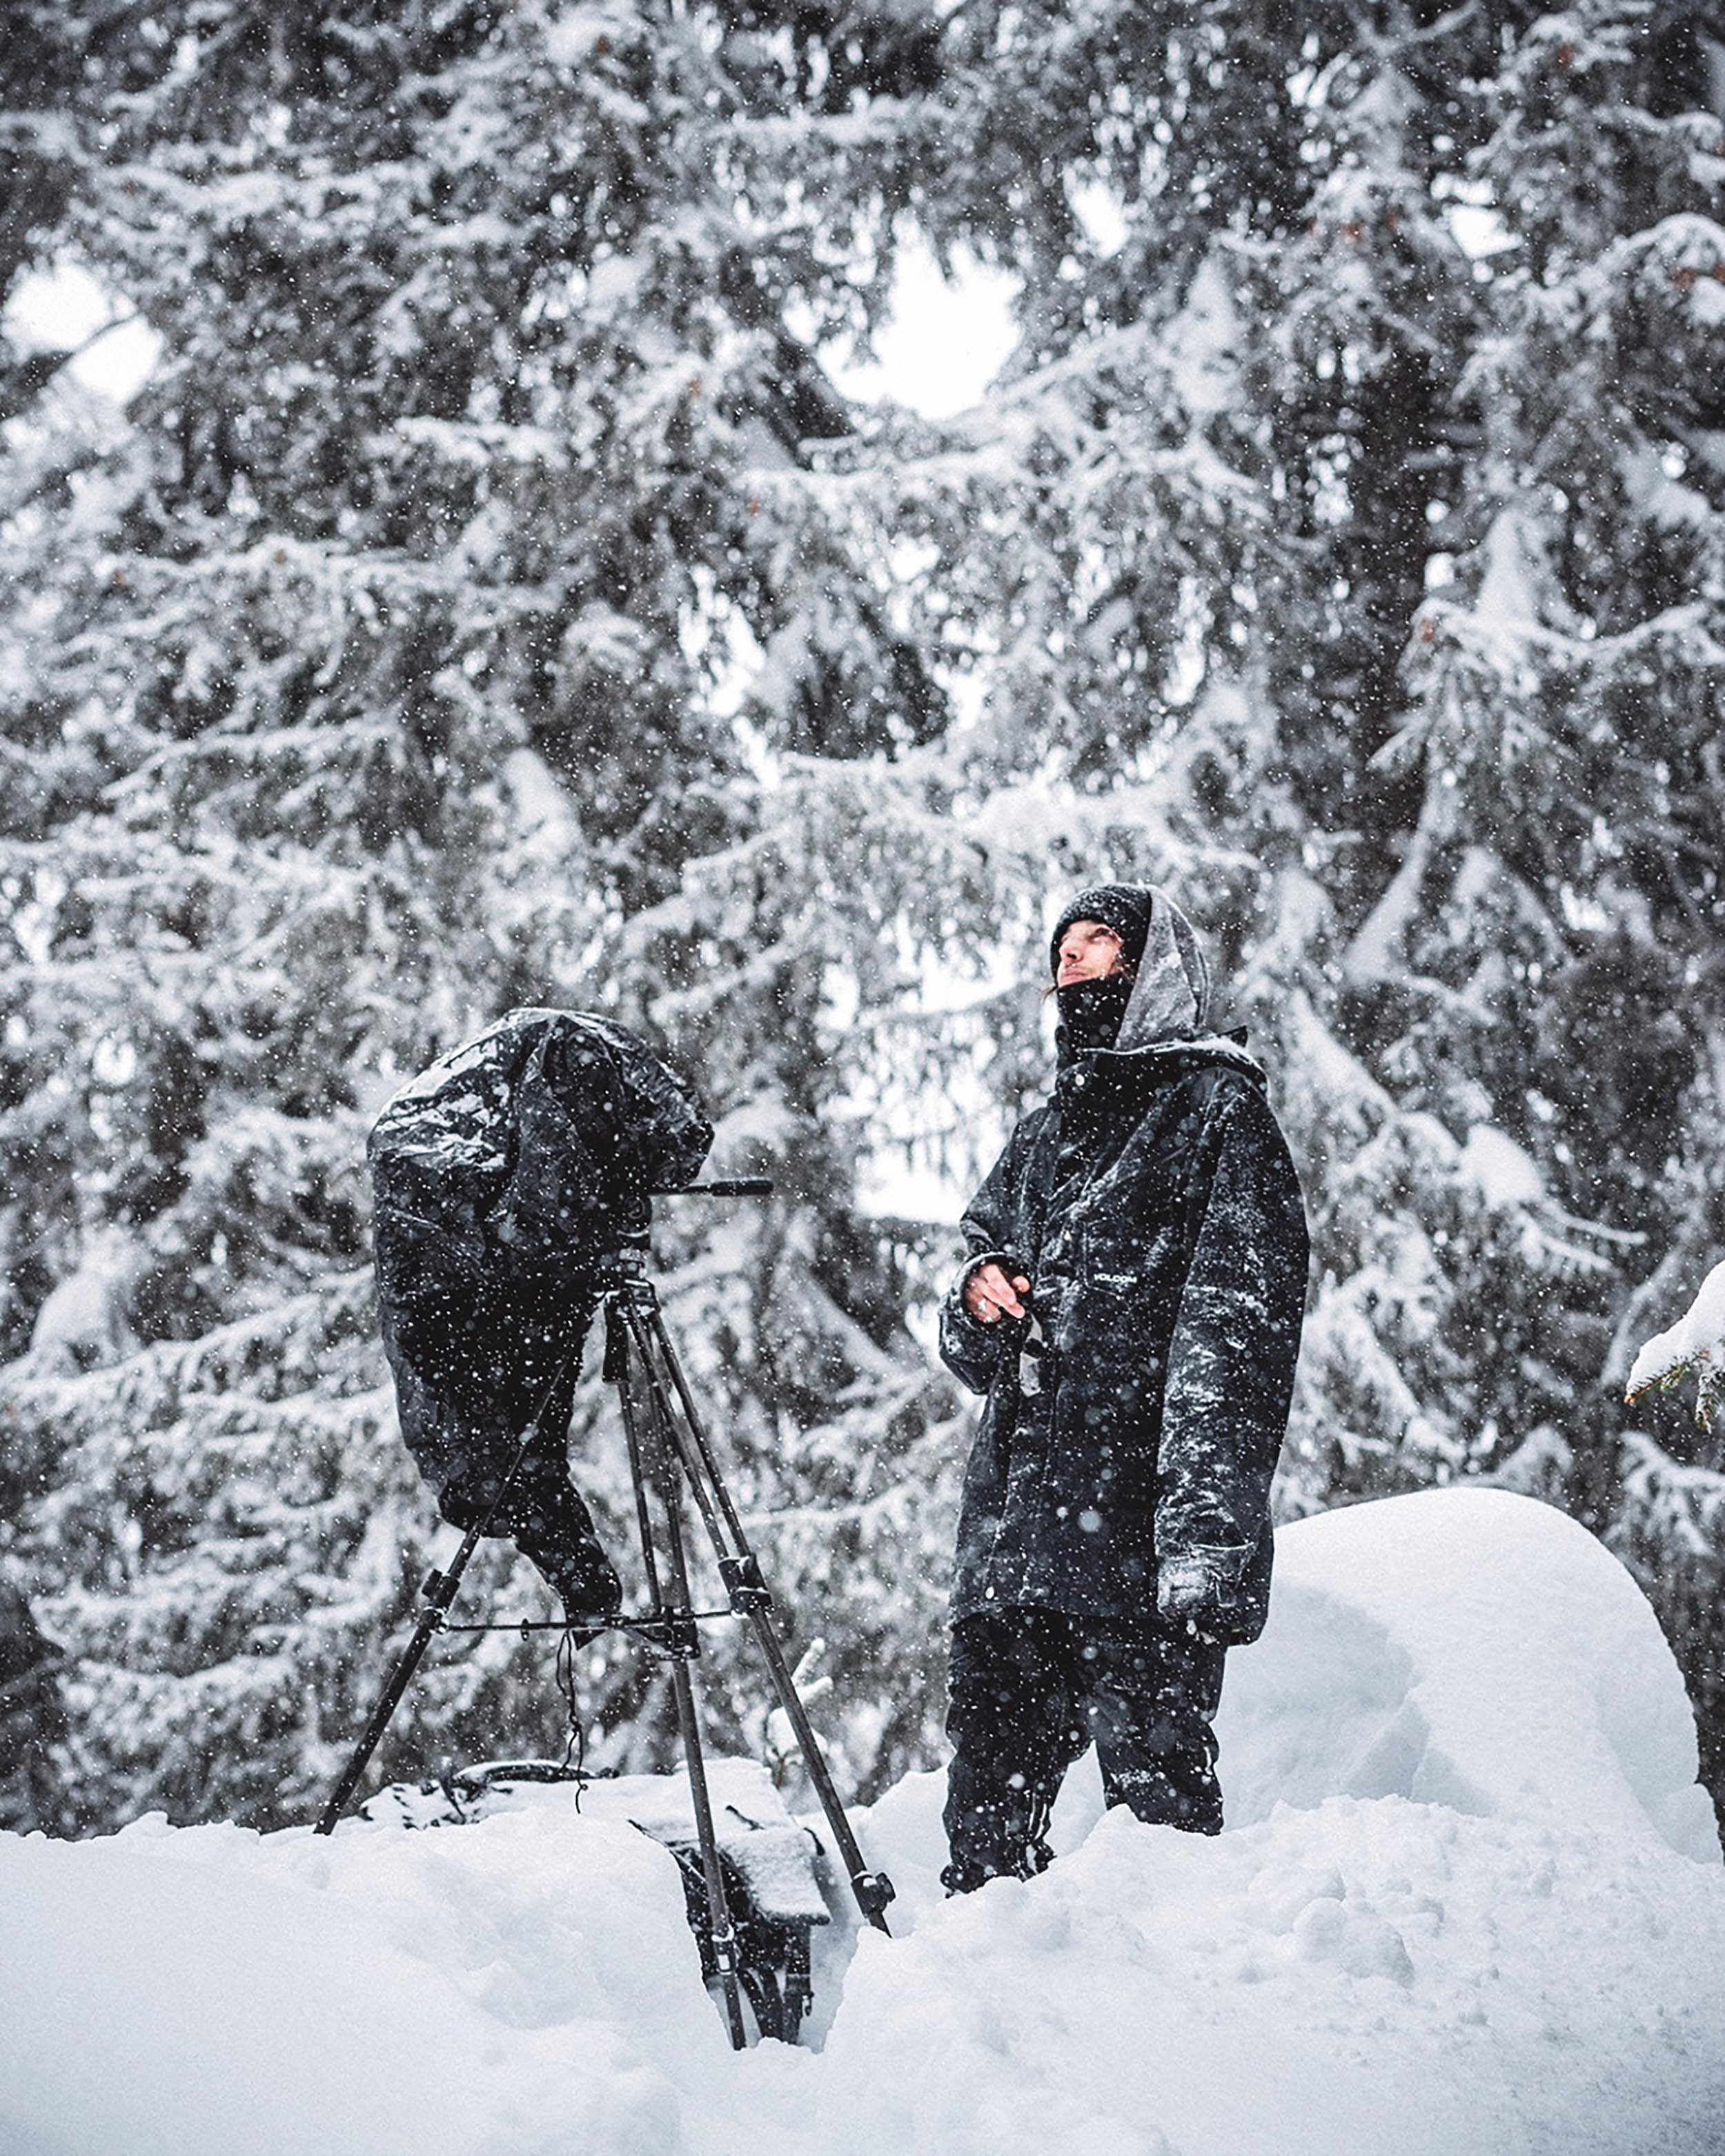 Mathias Wittwer filming during a snow storm. Photo by Aaron Schwartz